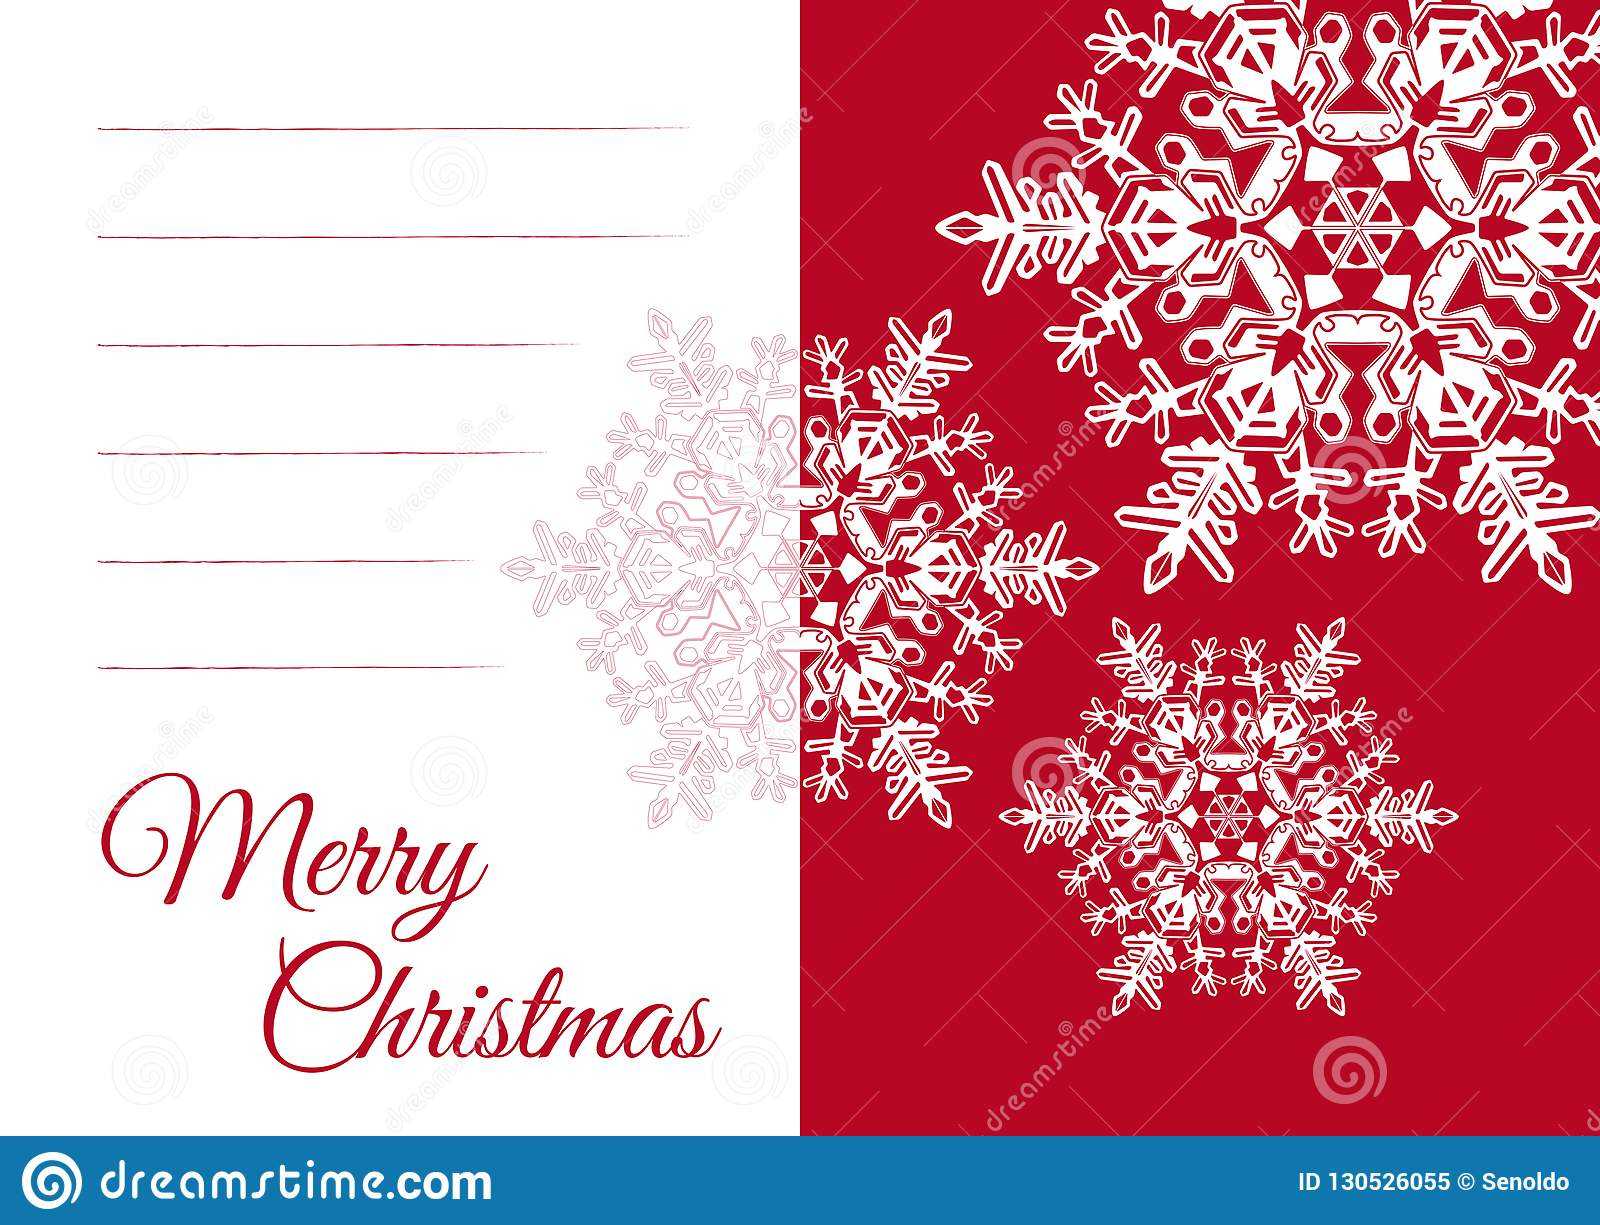 Christmas Greeting Card Template With Blank Text Field Stock Throughout Blank Christmas Card Templates Free